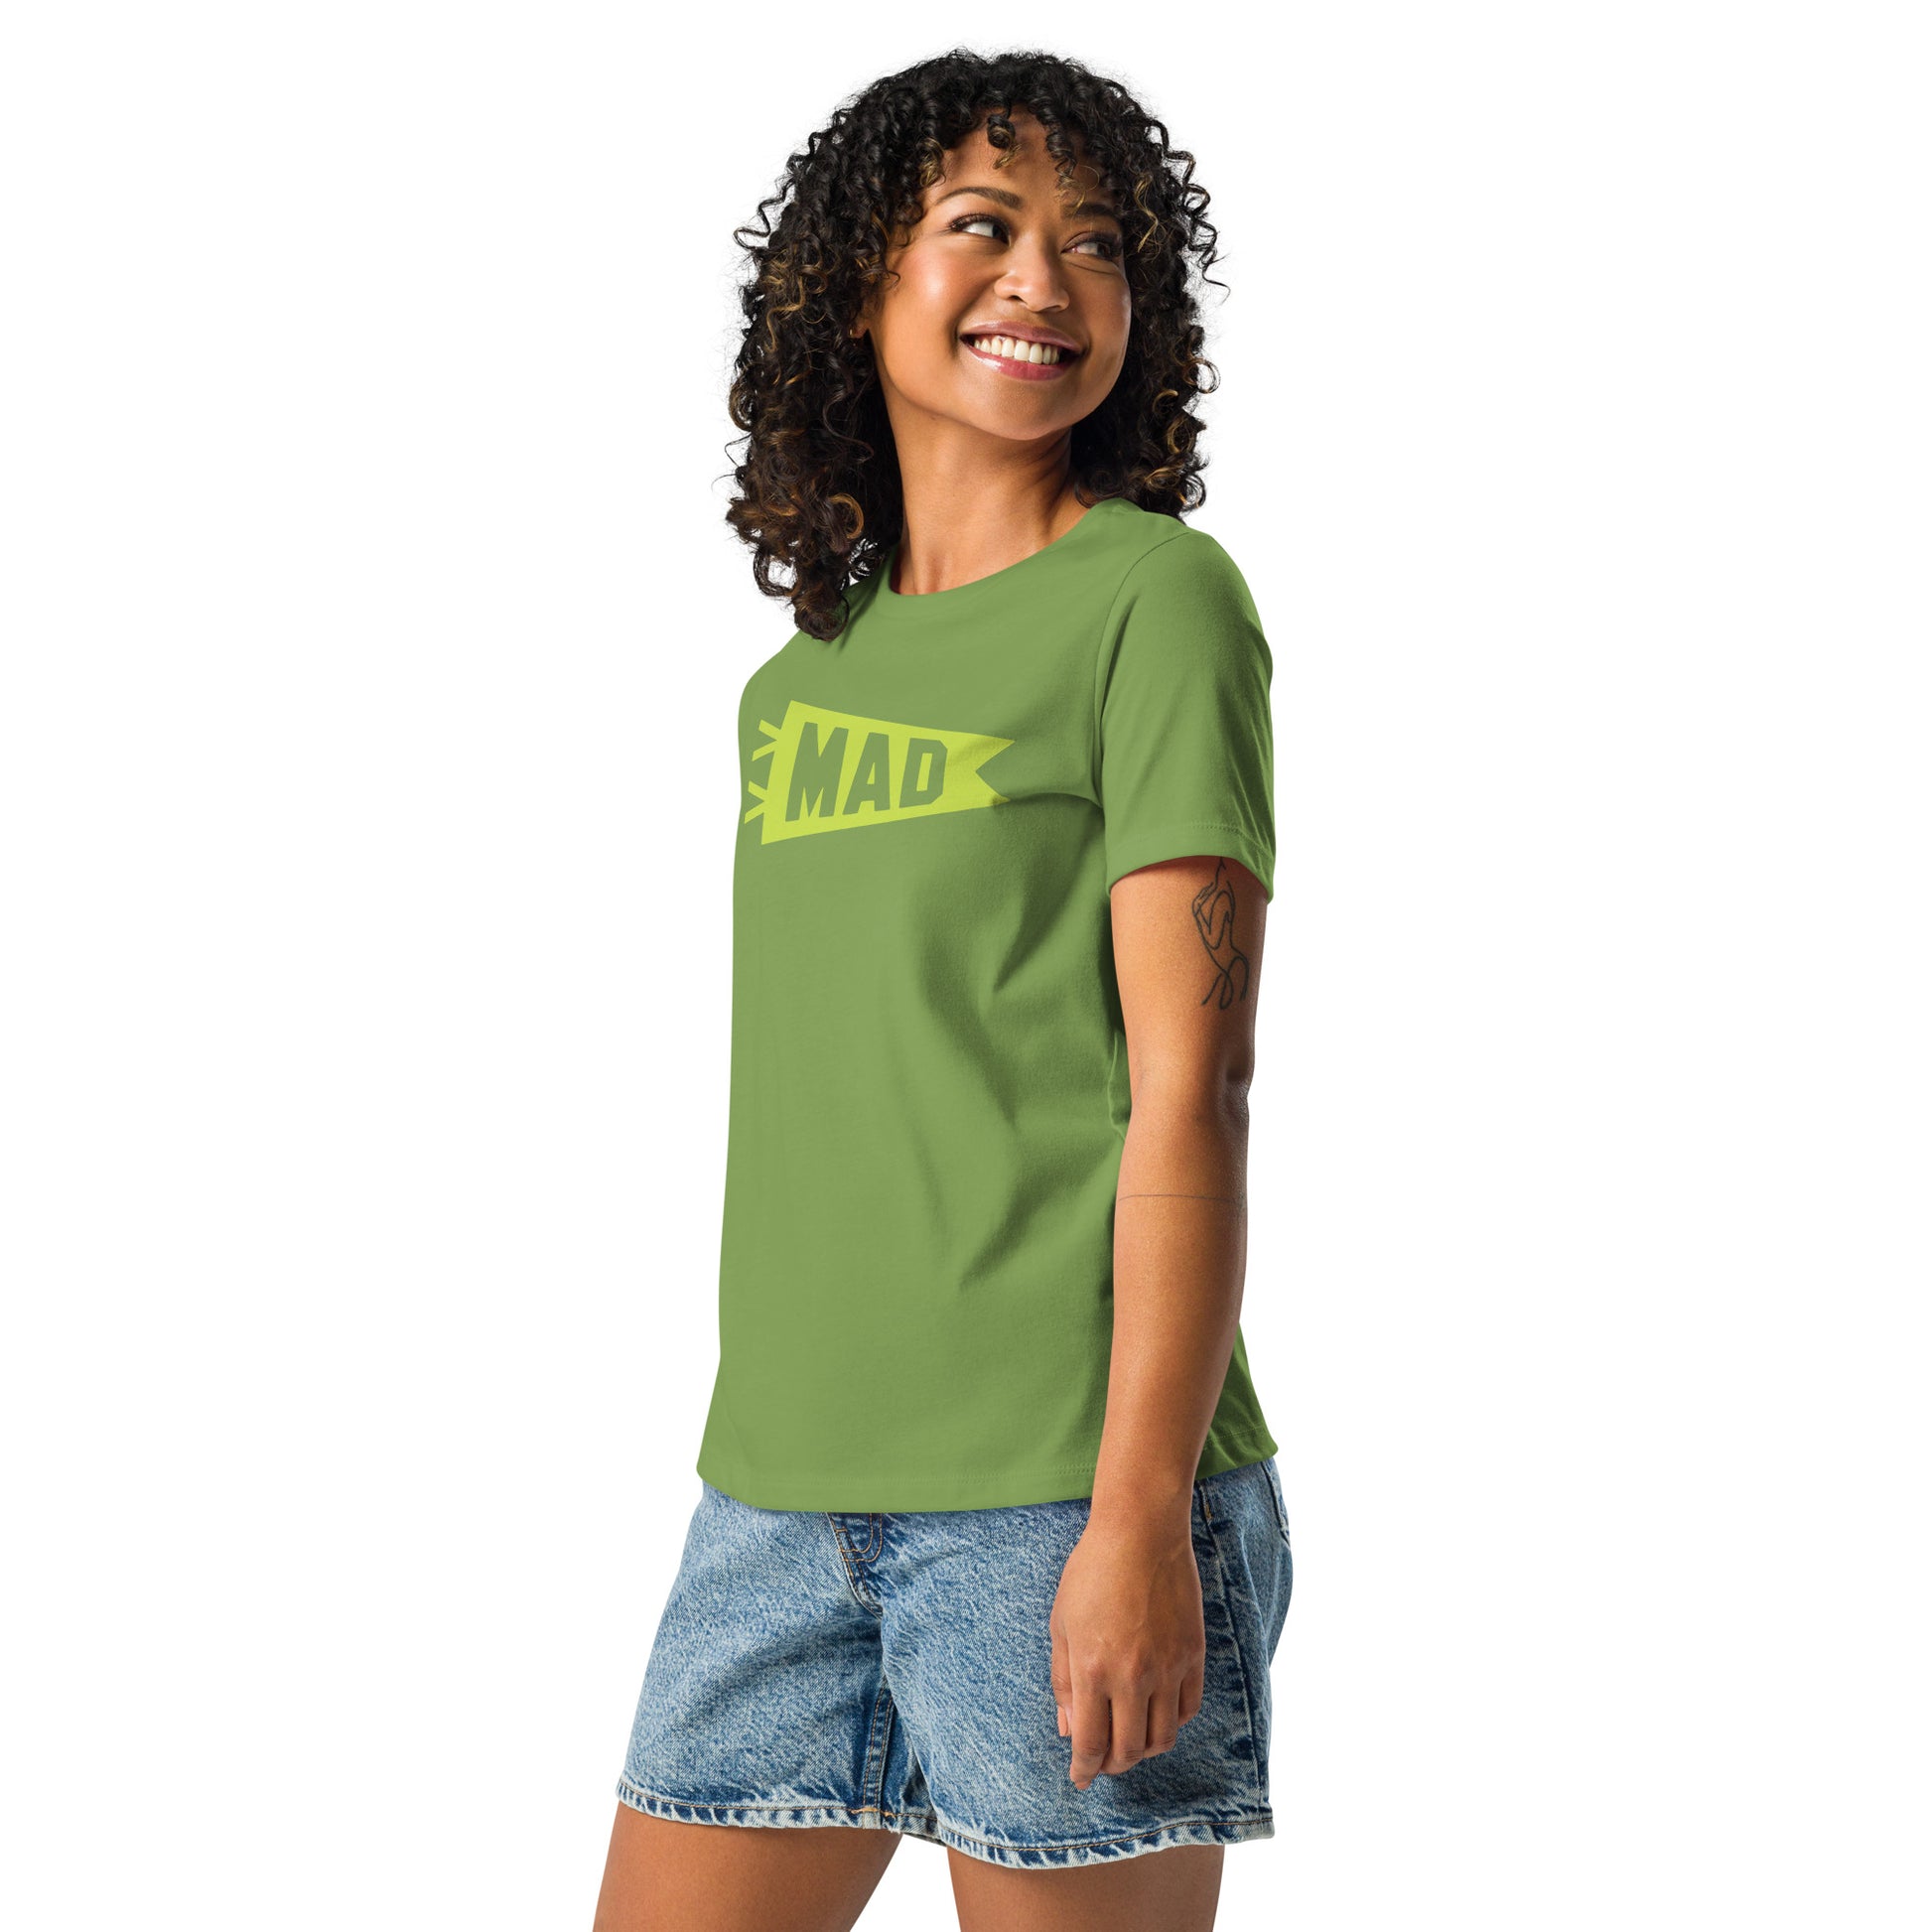 Airport Code Women's Tee - Green Graphic • MAD Madrid • YHM Designs - Image 06